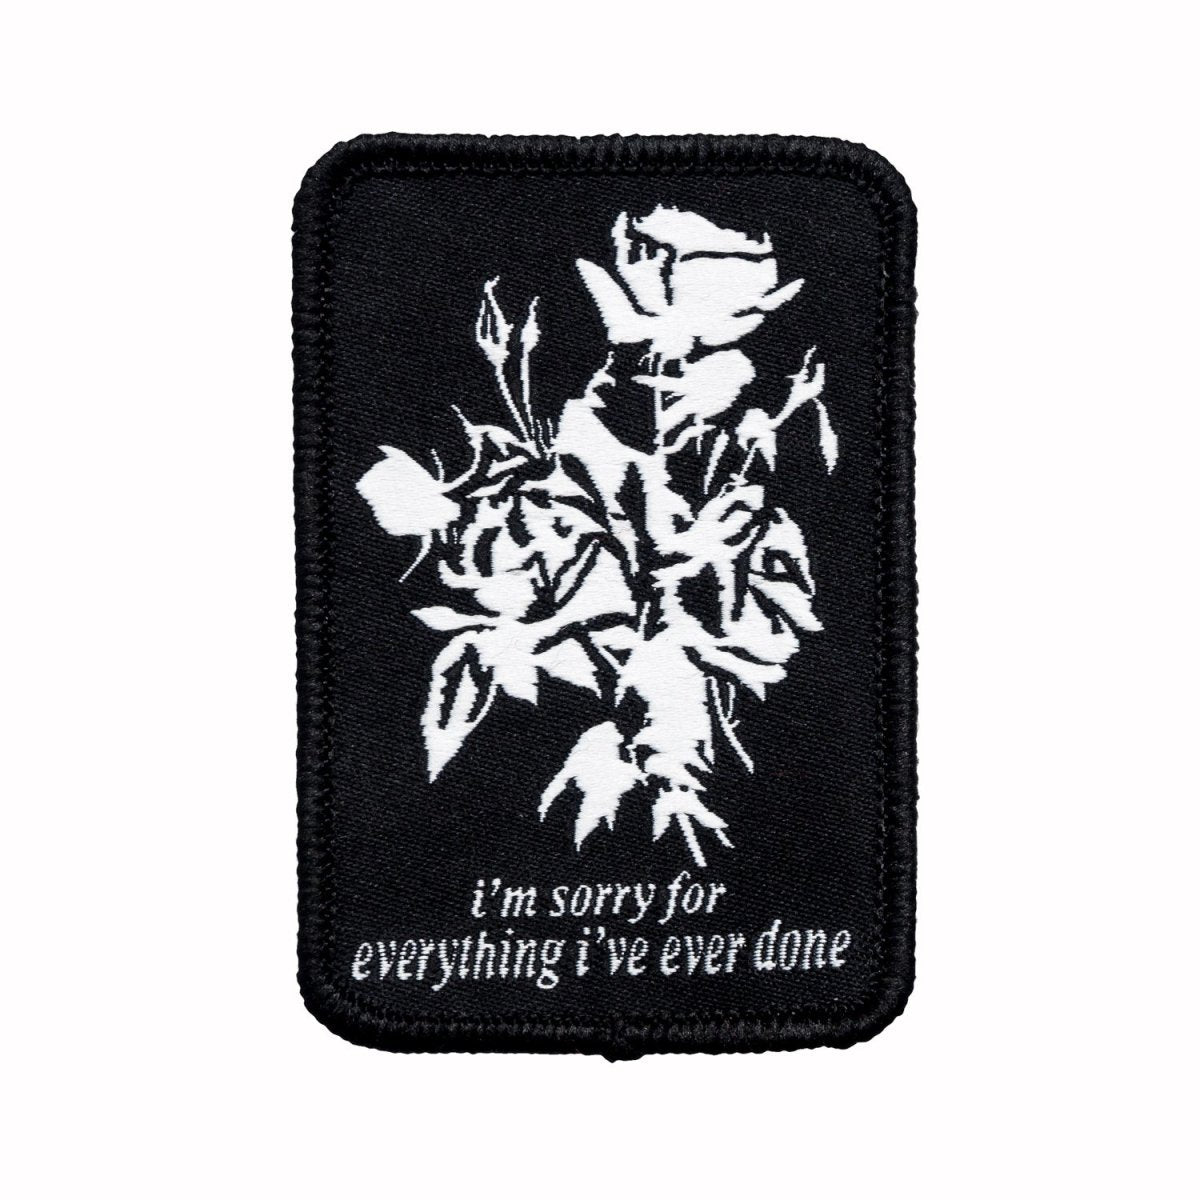 I'm sorry for everything I've ever done patch - Patch - Pretty Bad Co.